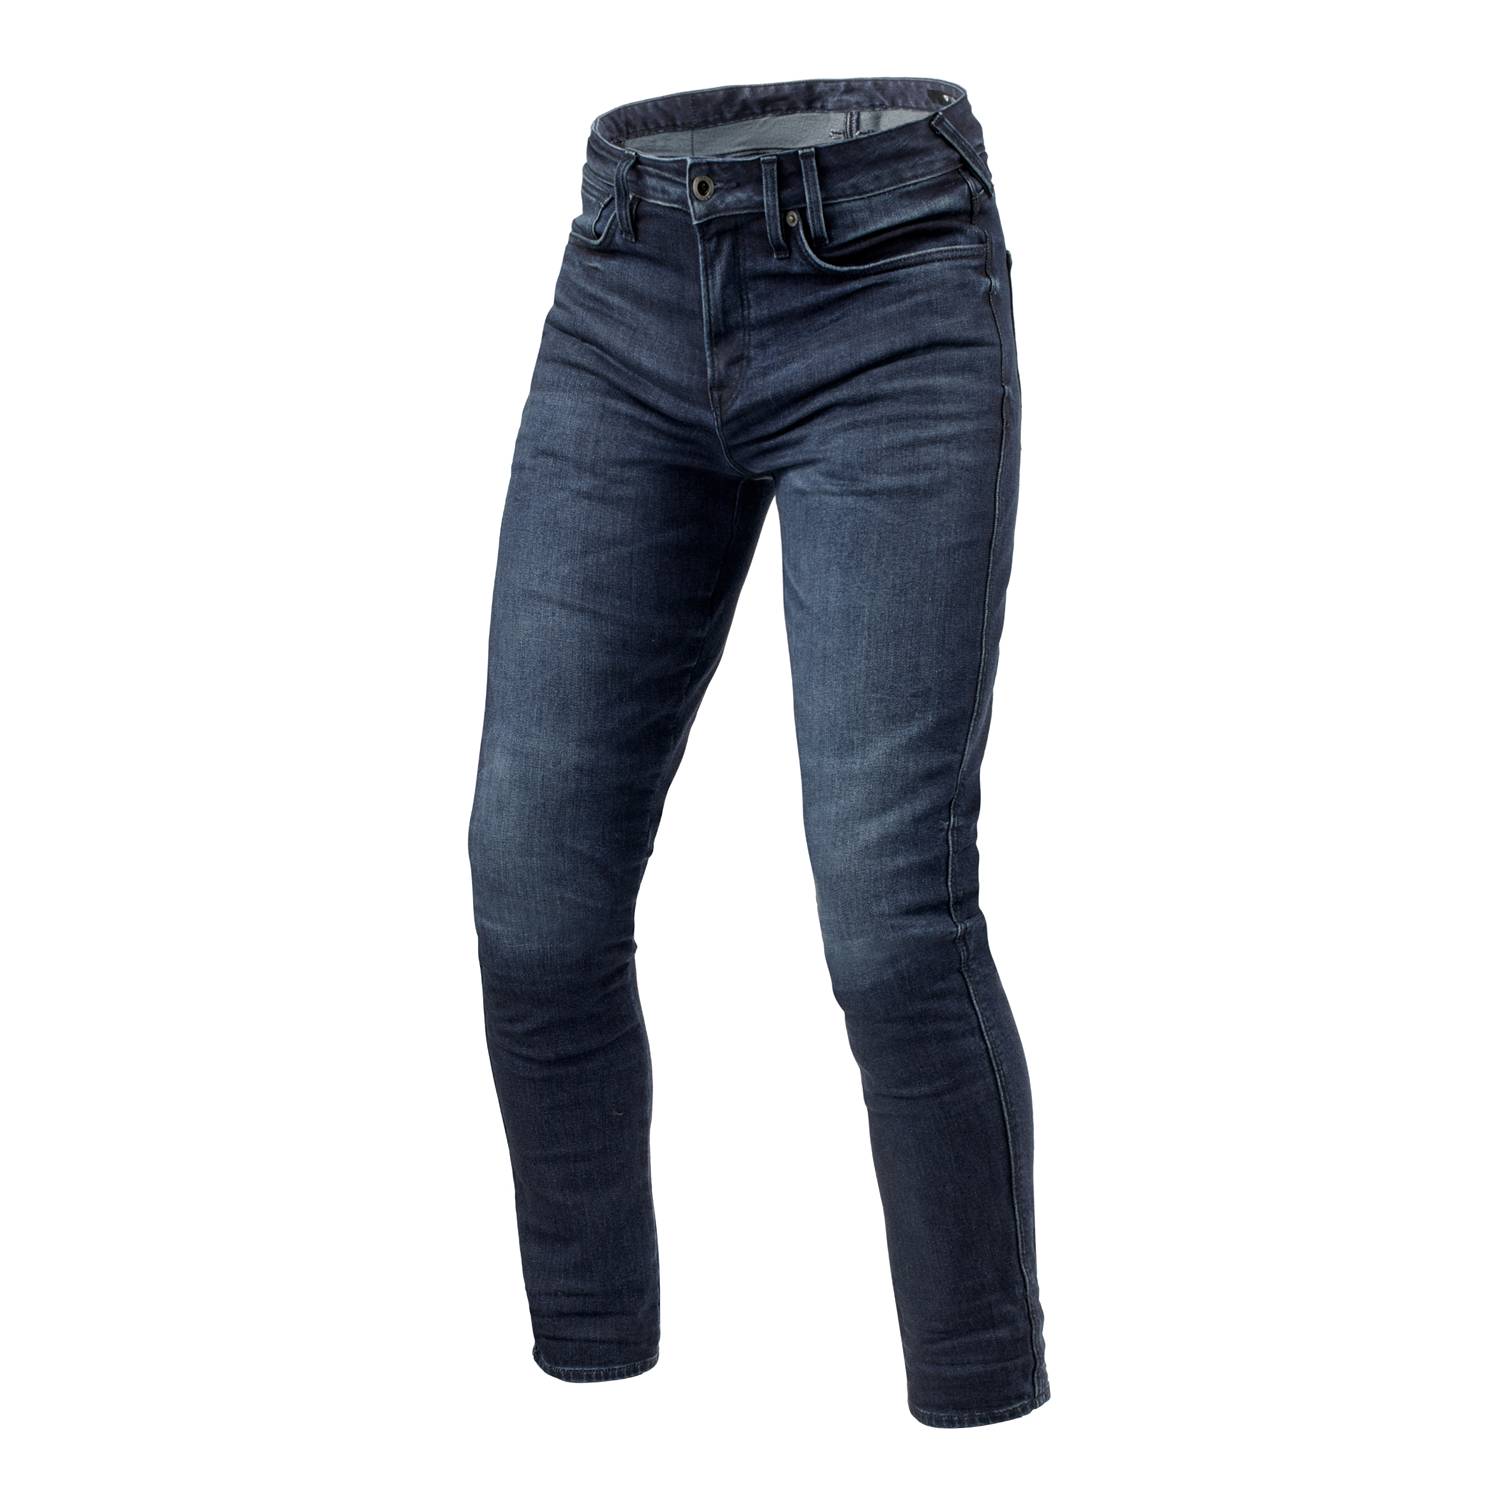 Image of REV'IT! Jeans Carlin SK Dark Blue Used L34 Motorcycle Jeans Size L34/W31 ID 8700001376396